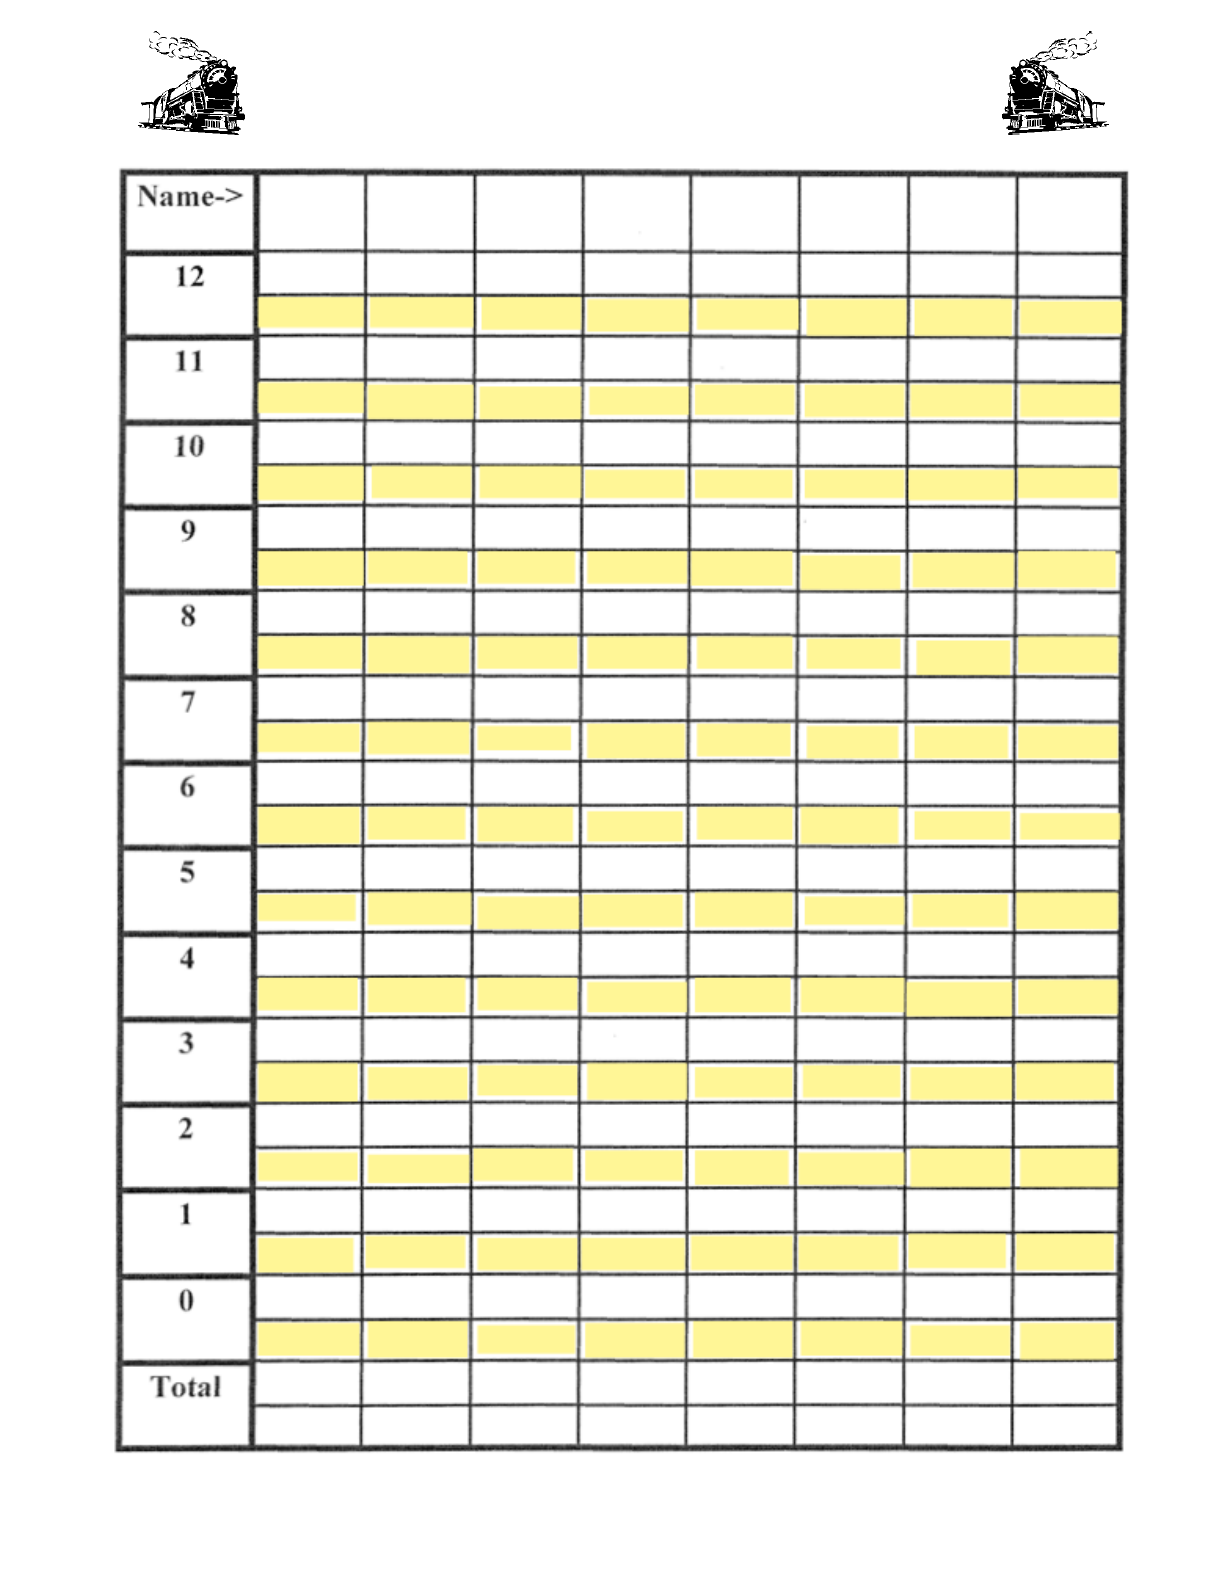 Free Mexican Train Score Sheet 1 PDF 1 Page s Mexican Train Dominoes Train Template Printable